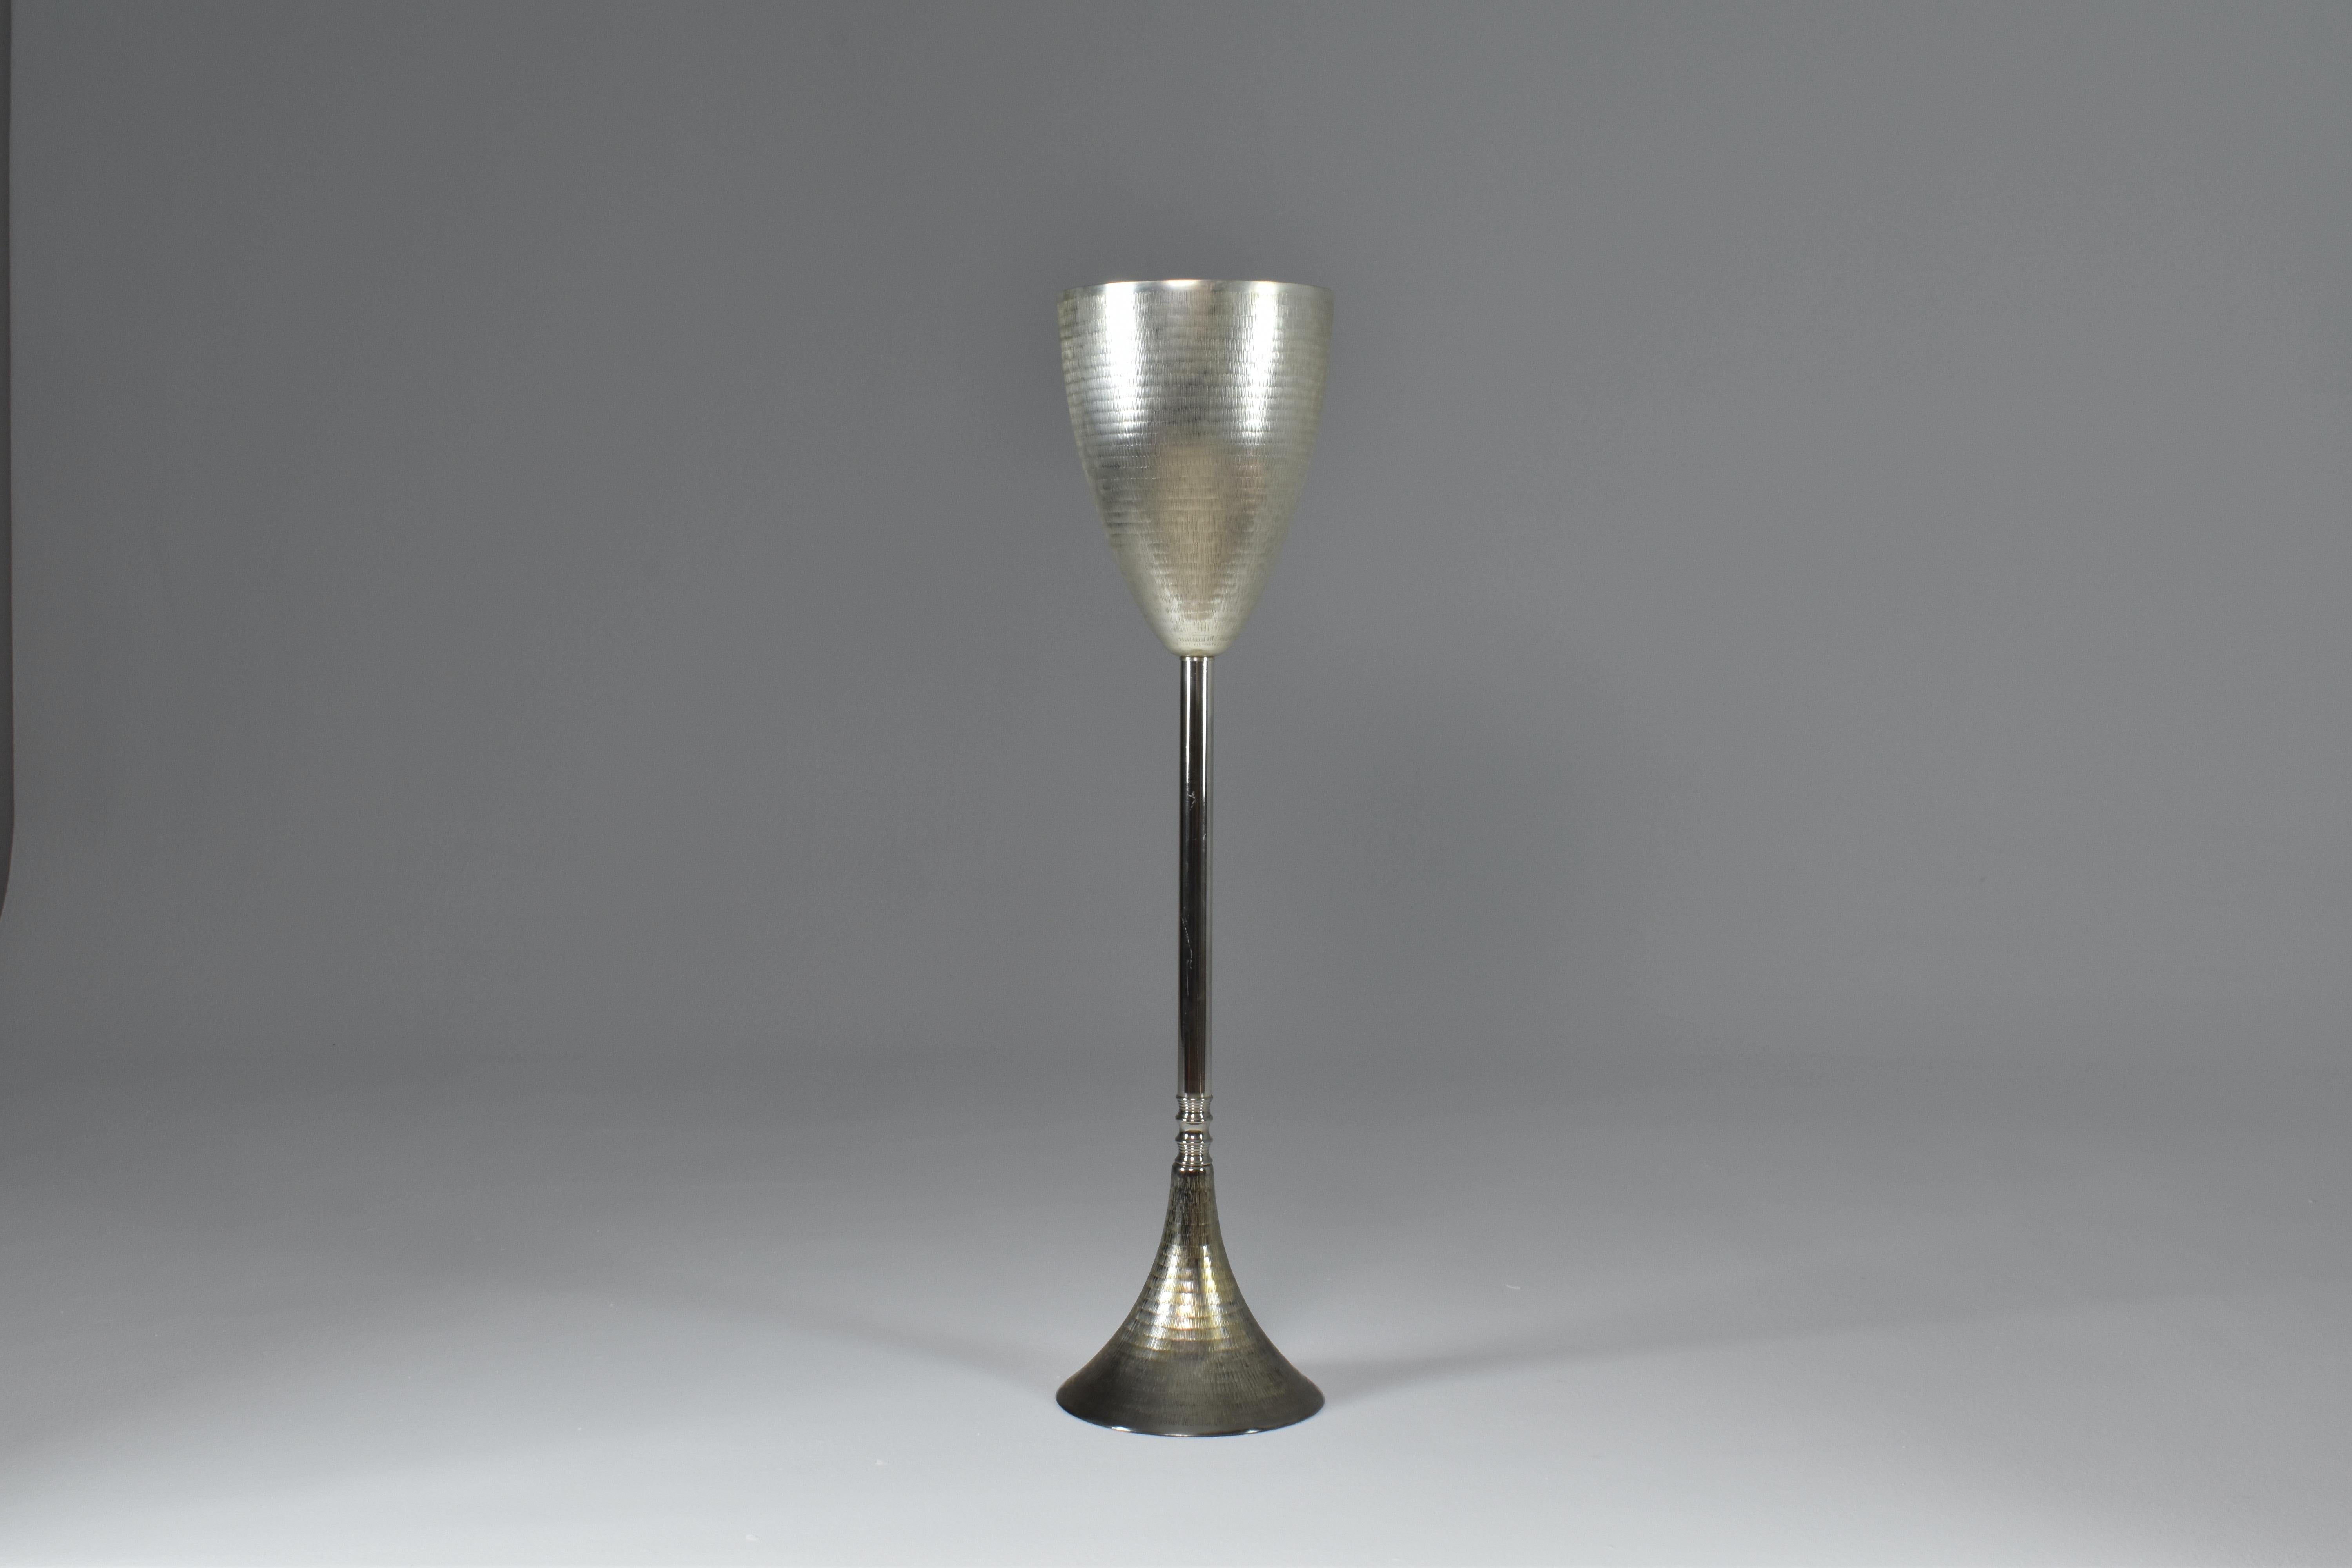 Contemporary made-to-measure handcrafted nickel-plated brass champagne or wine bucket stand with skillfully sculpted and handmade hammered details.
Designed by Jonathan Amar, handcrafted at his atelier in Rabat. 

A standout accessory for high-end